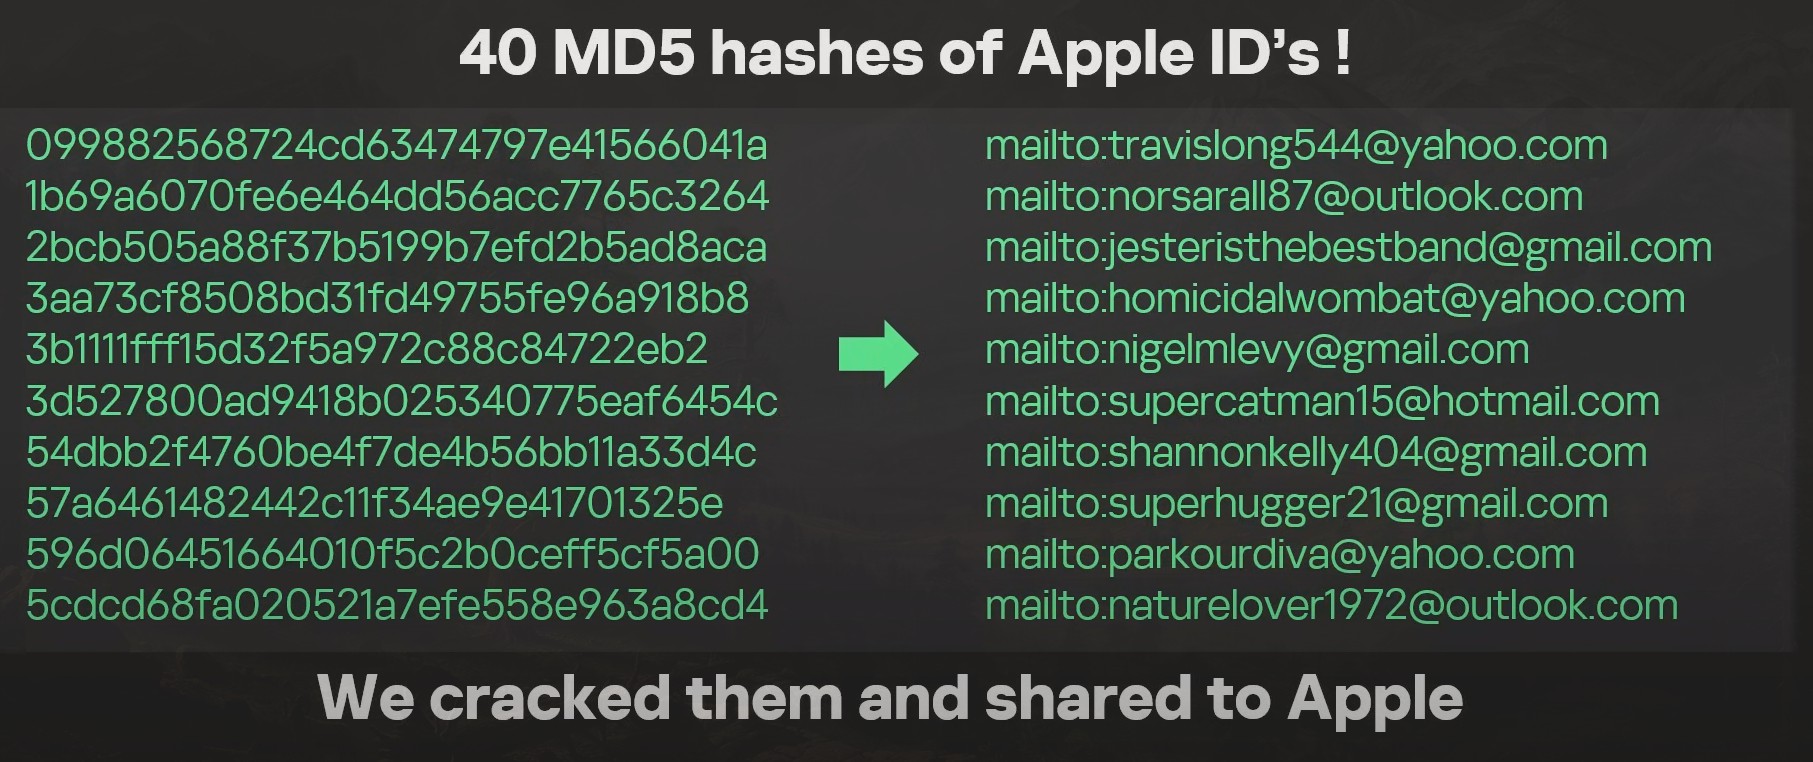 A list of Apple IDs cracked by the researchers. They look like 'mailto:travislong544@yahoo.com'